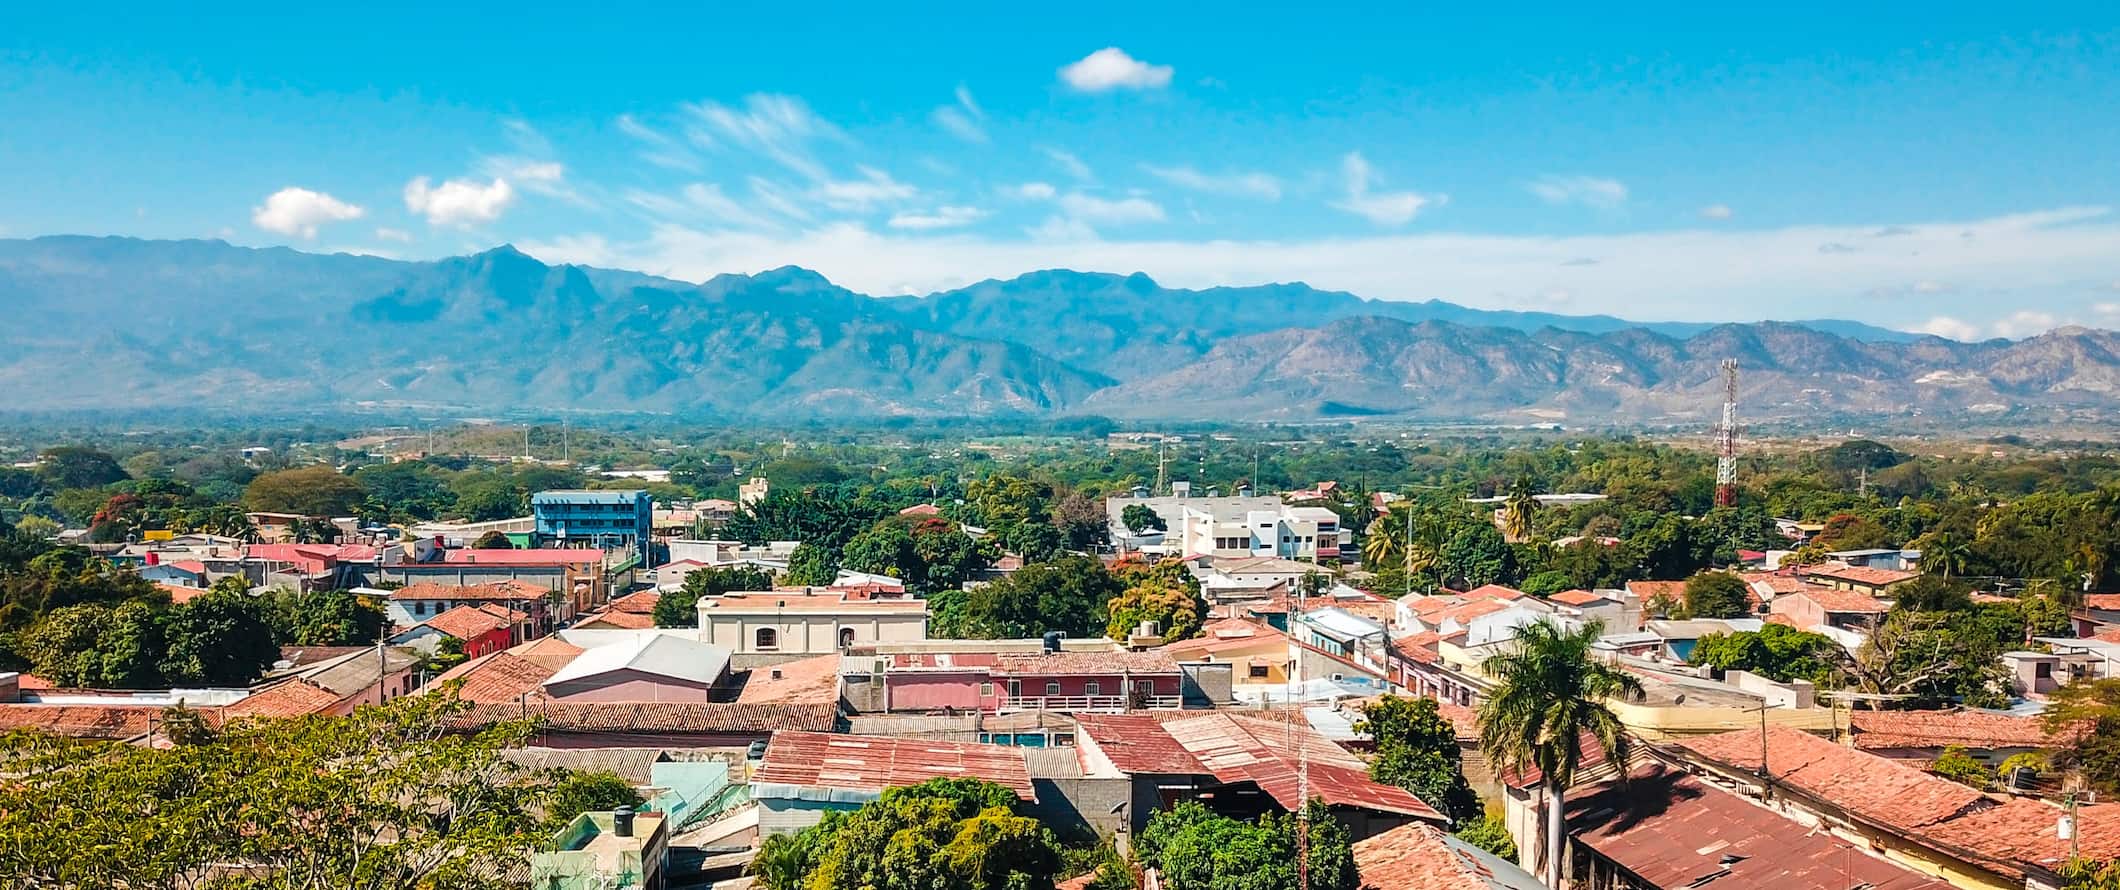 A sprawling town with old buildings in Honduras